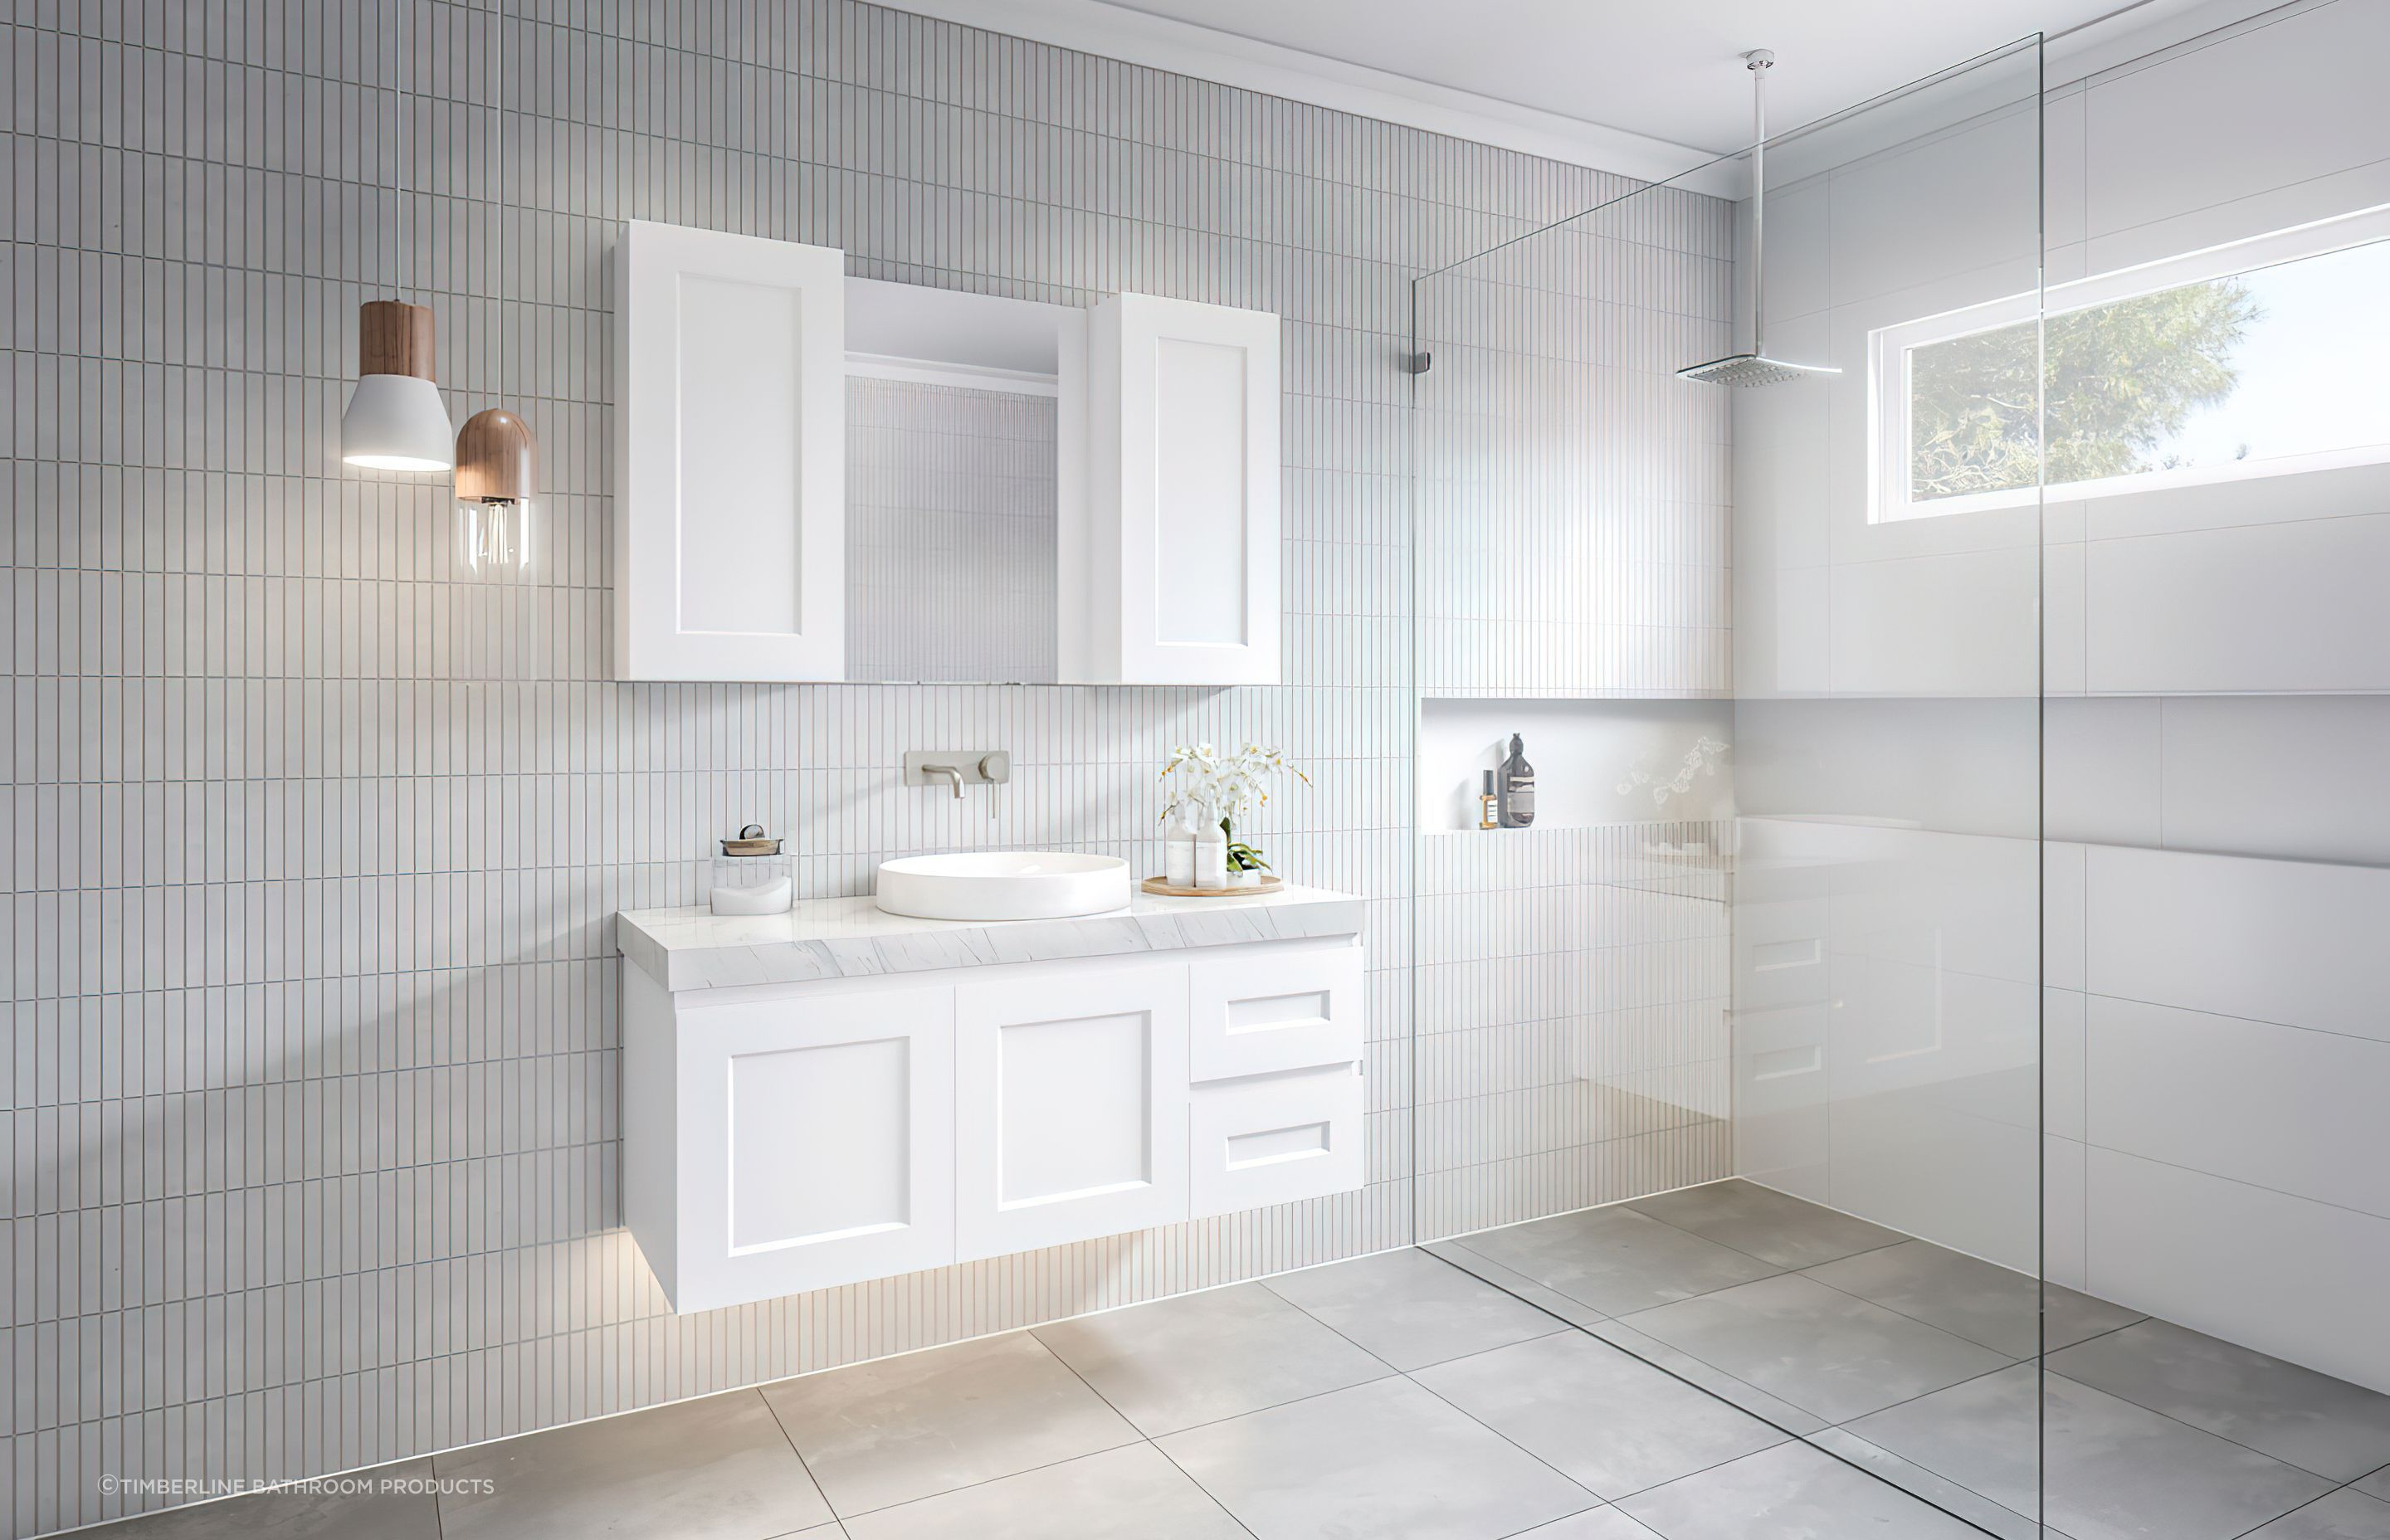 The right cabinetry in a bathroom adds both storage and sophistication to a space, seen here with the Victoria